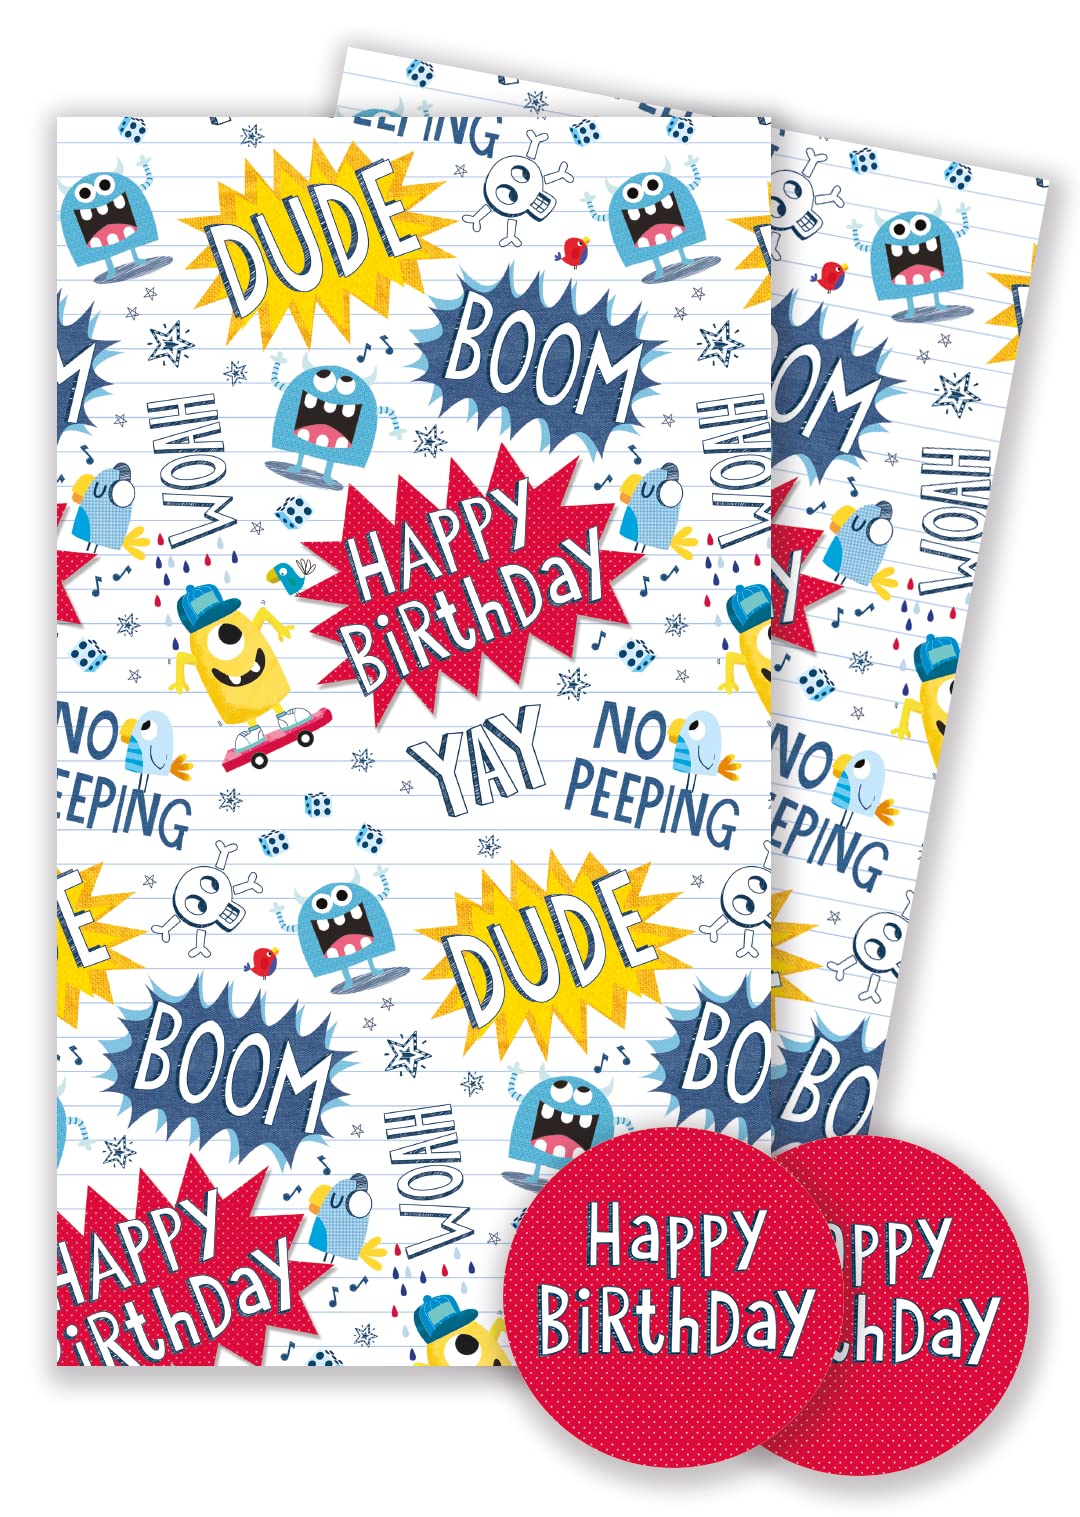 Abacus Cards 08772A  inchesBirthday Monsters inches Gift Wrap Pack with 2 Sheets & 2 Tags - Plastic Free & Fully Recyclable